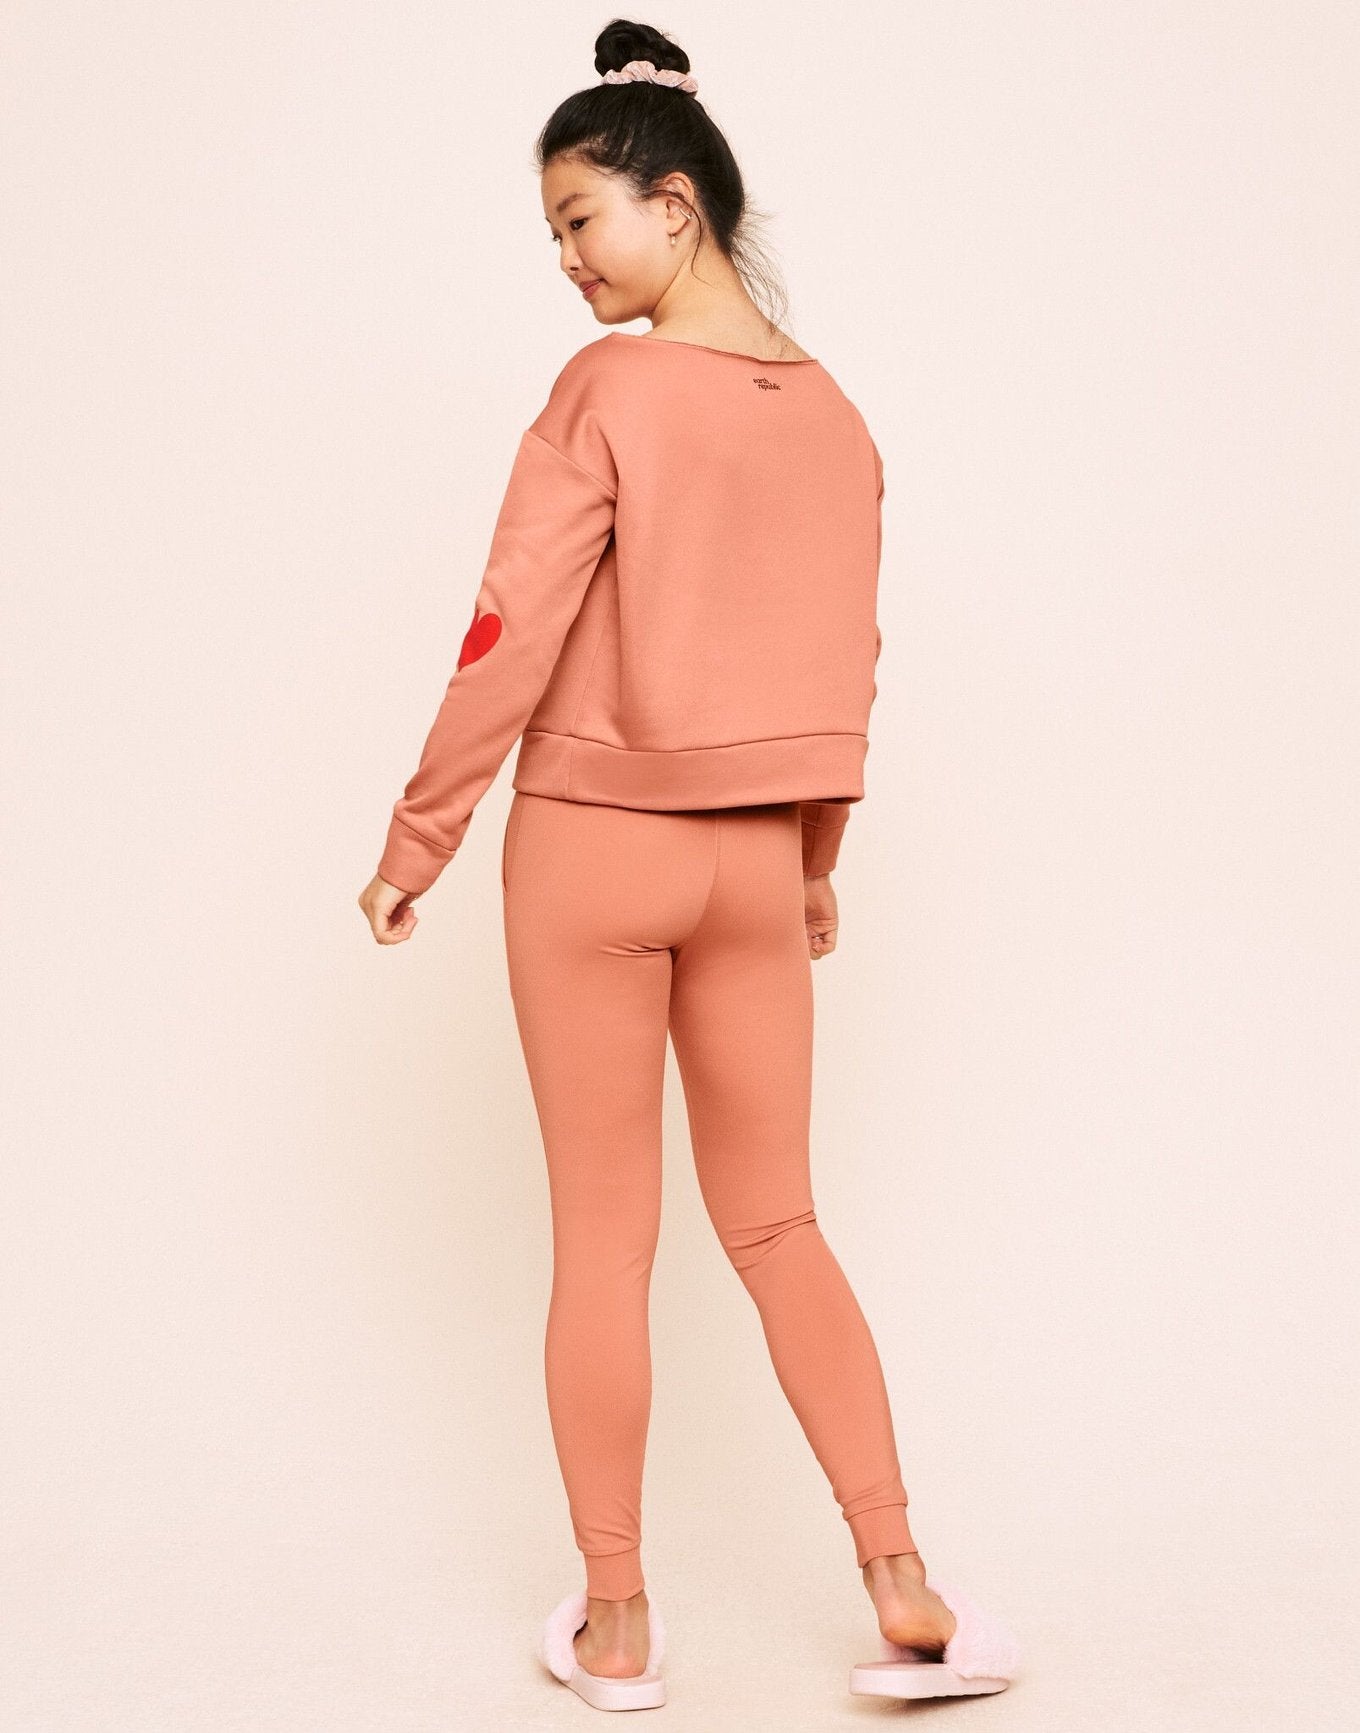 Earth Republic Jenesis Fitted Legging Leggings in color Rhododendron Marl and shape pant